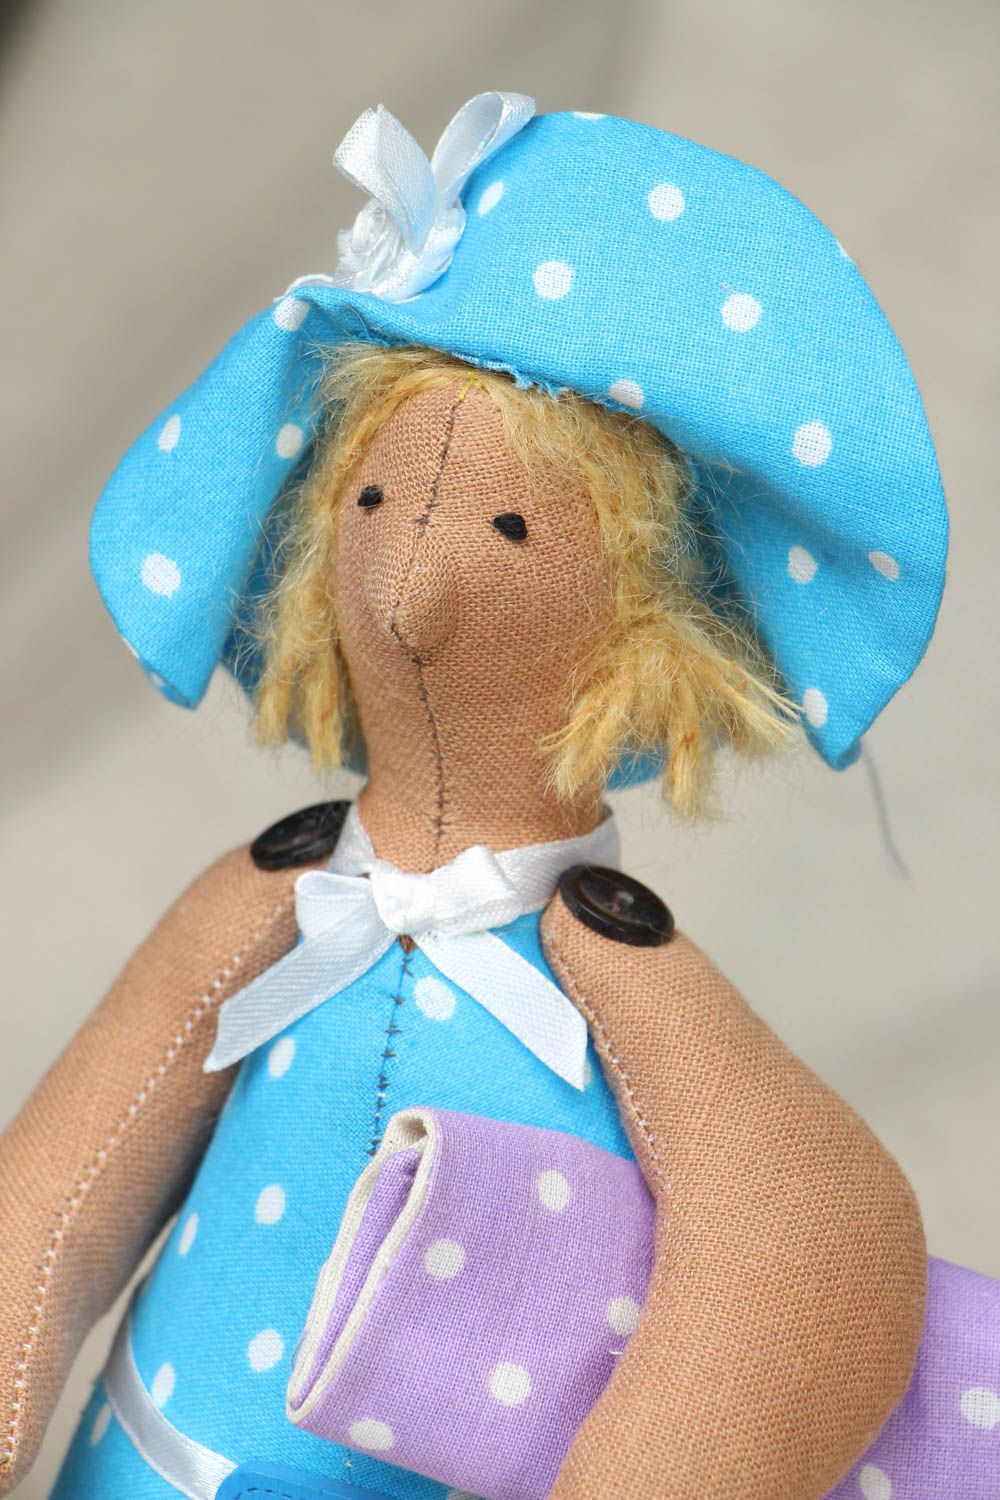 Fabric doll in blue swimming suit photo 2